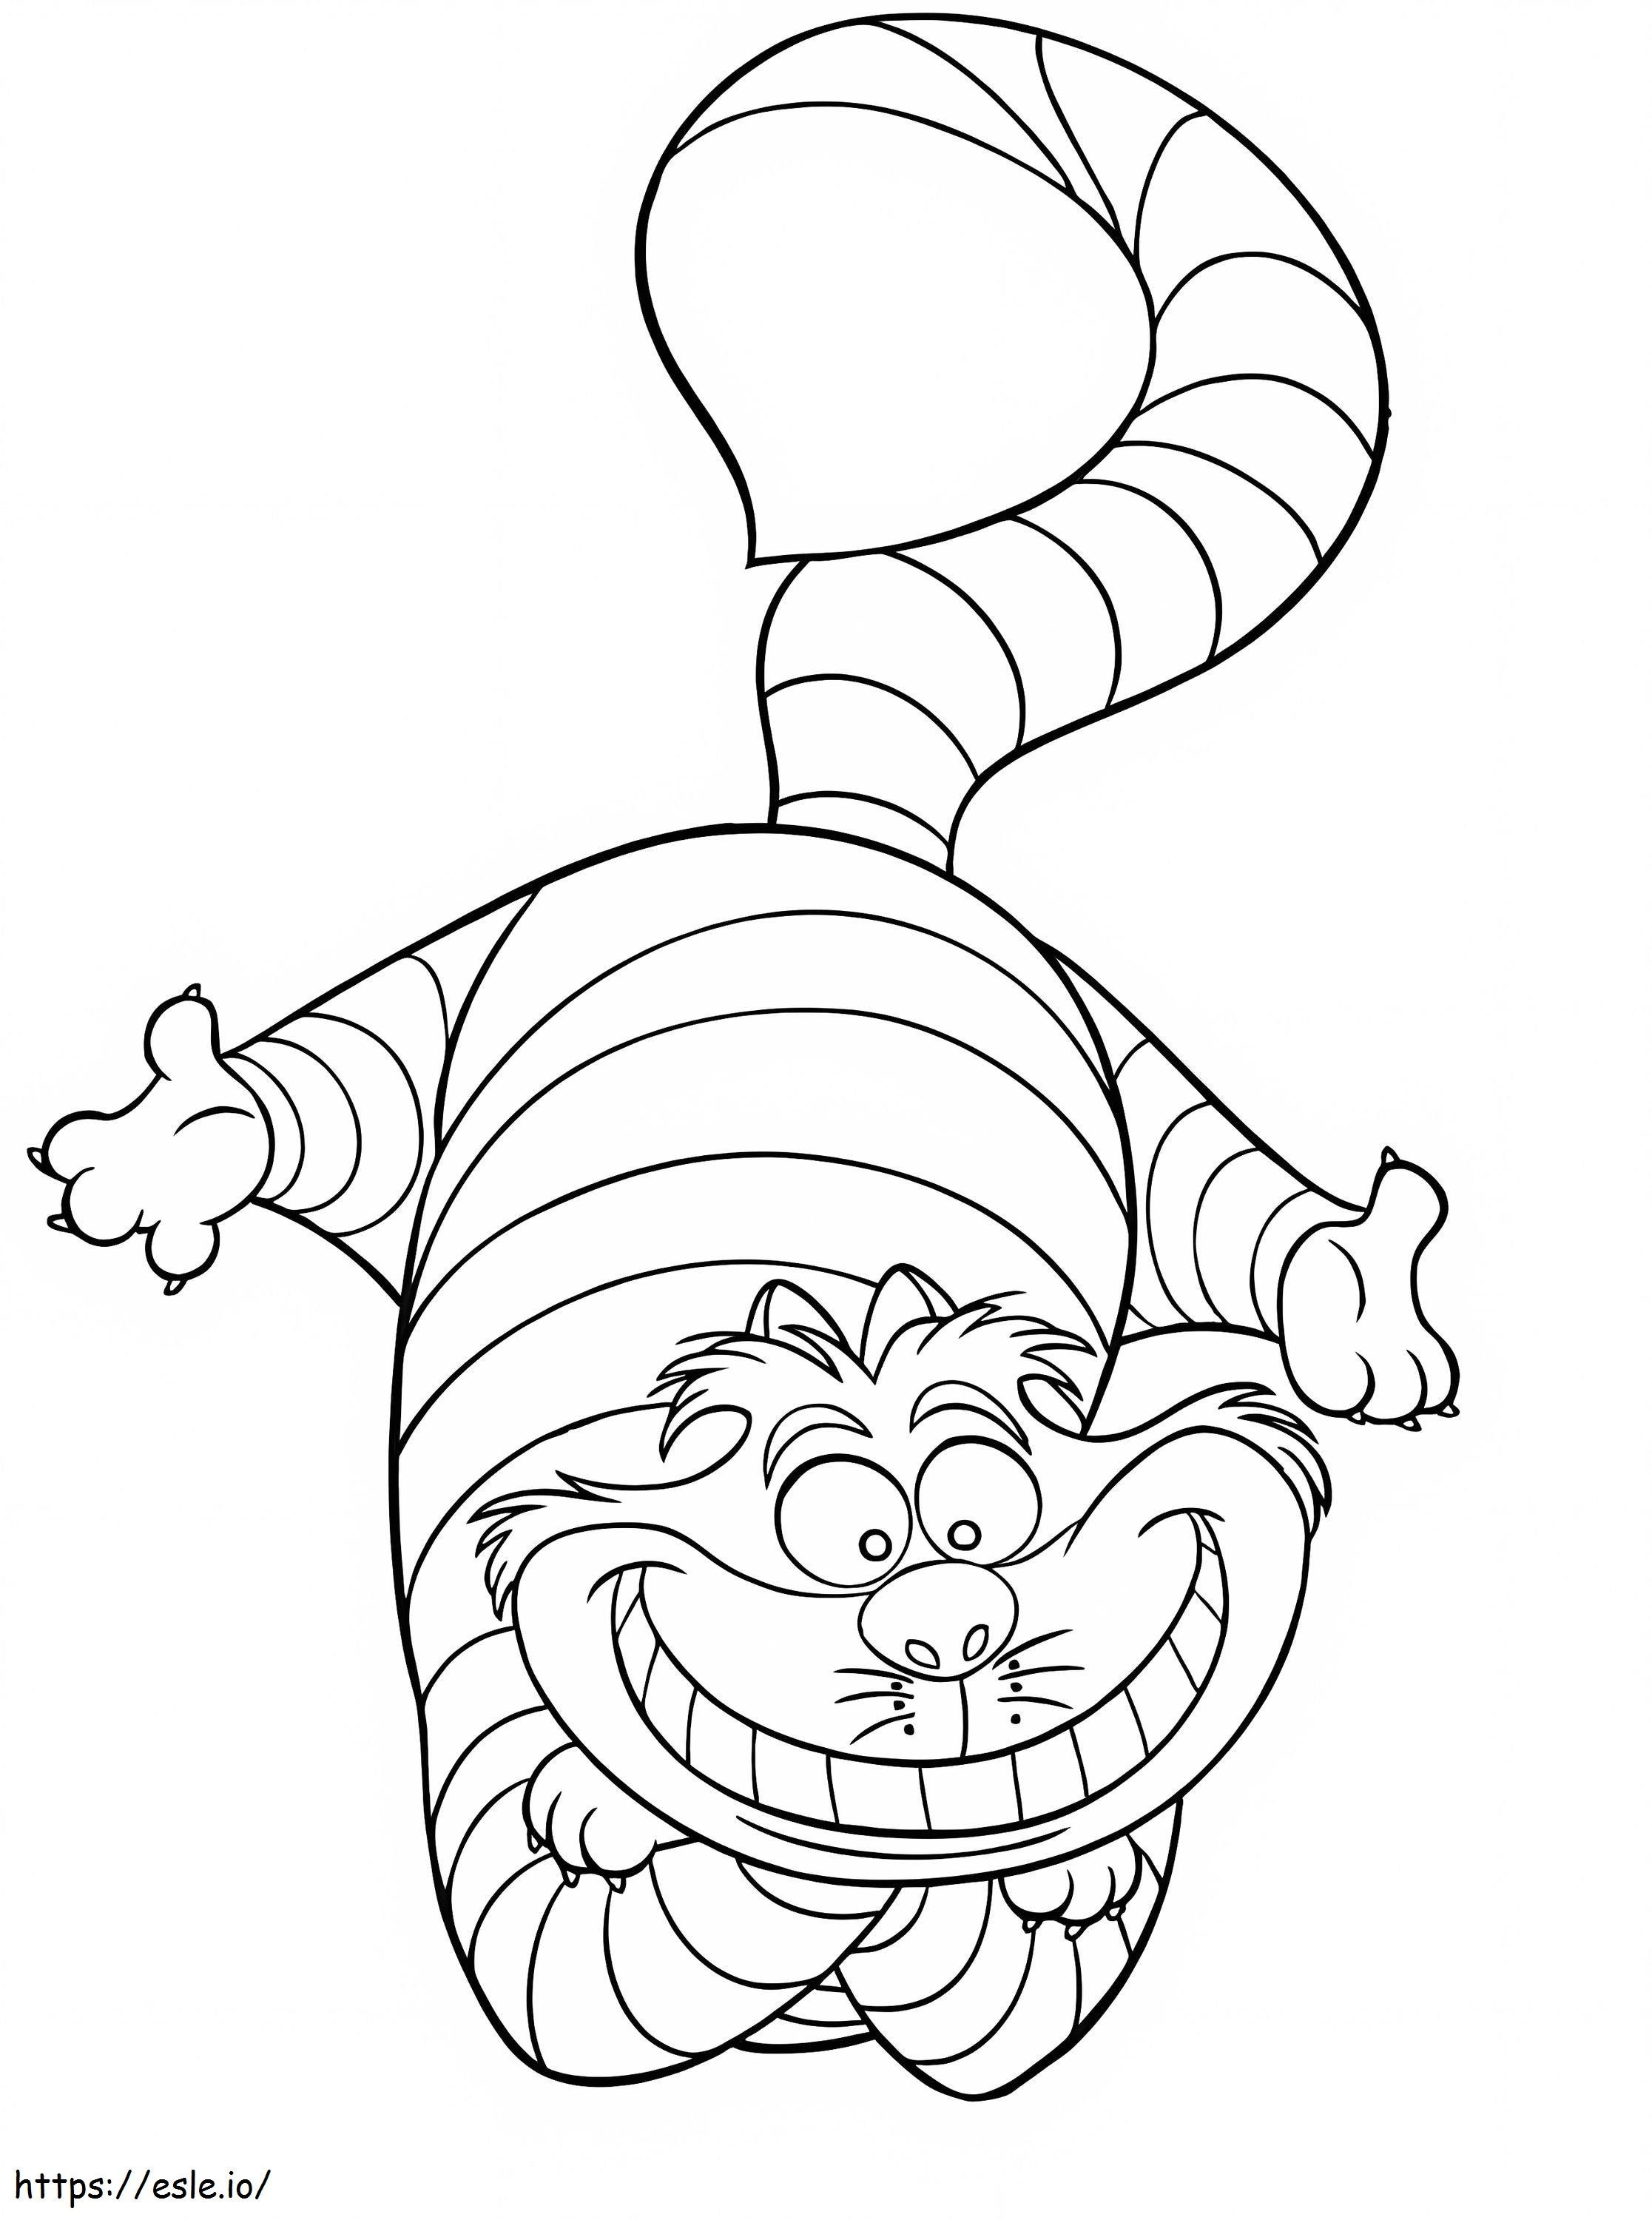 Free Printable Cheshire Cat coloring page